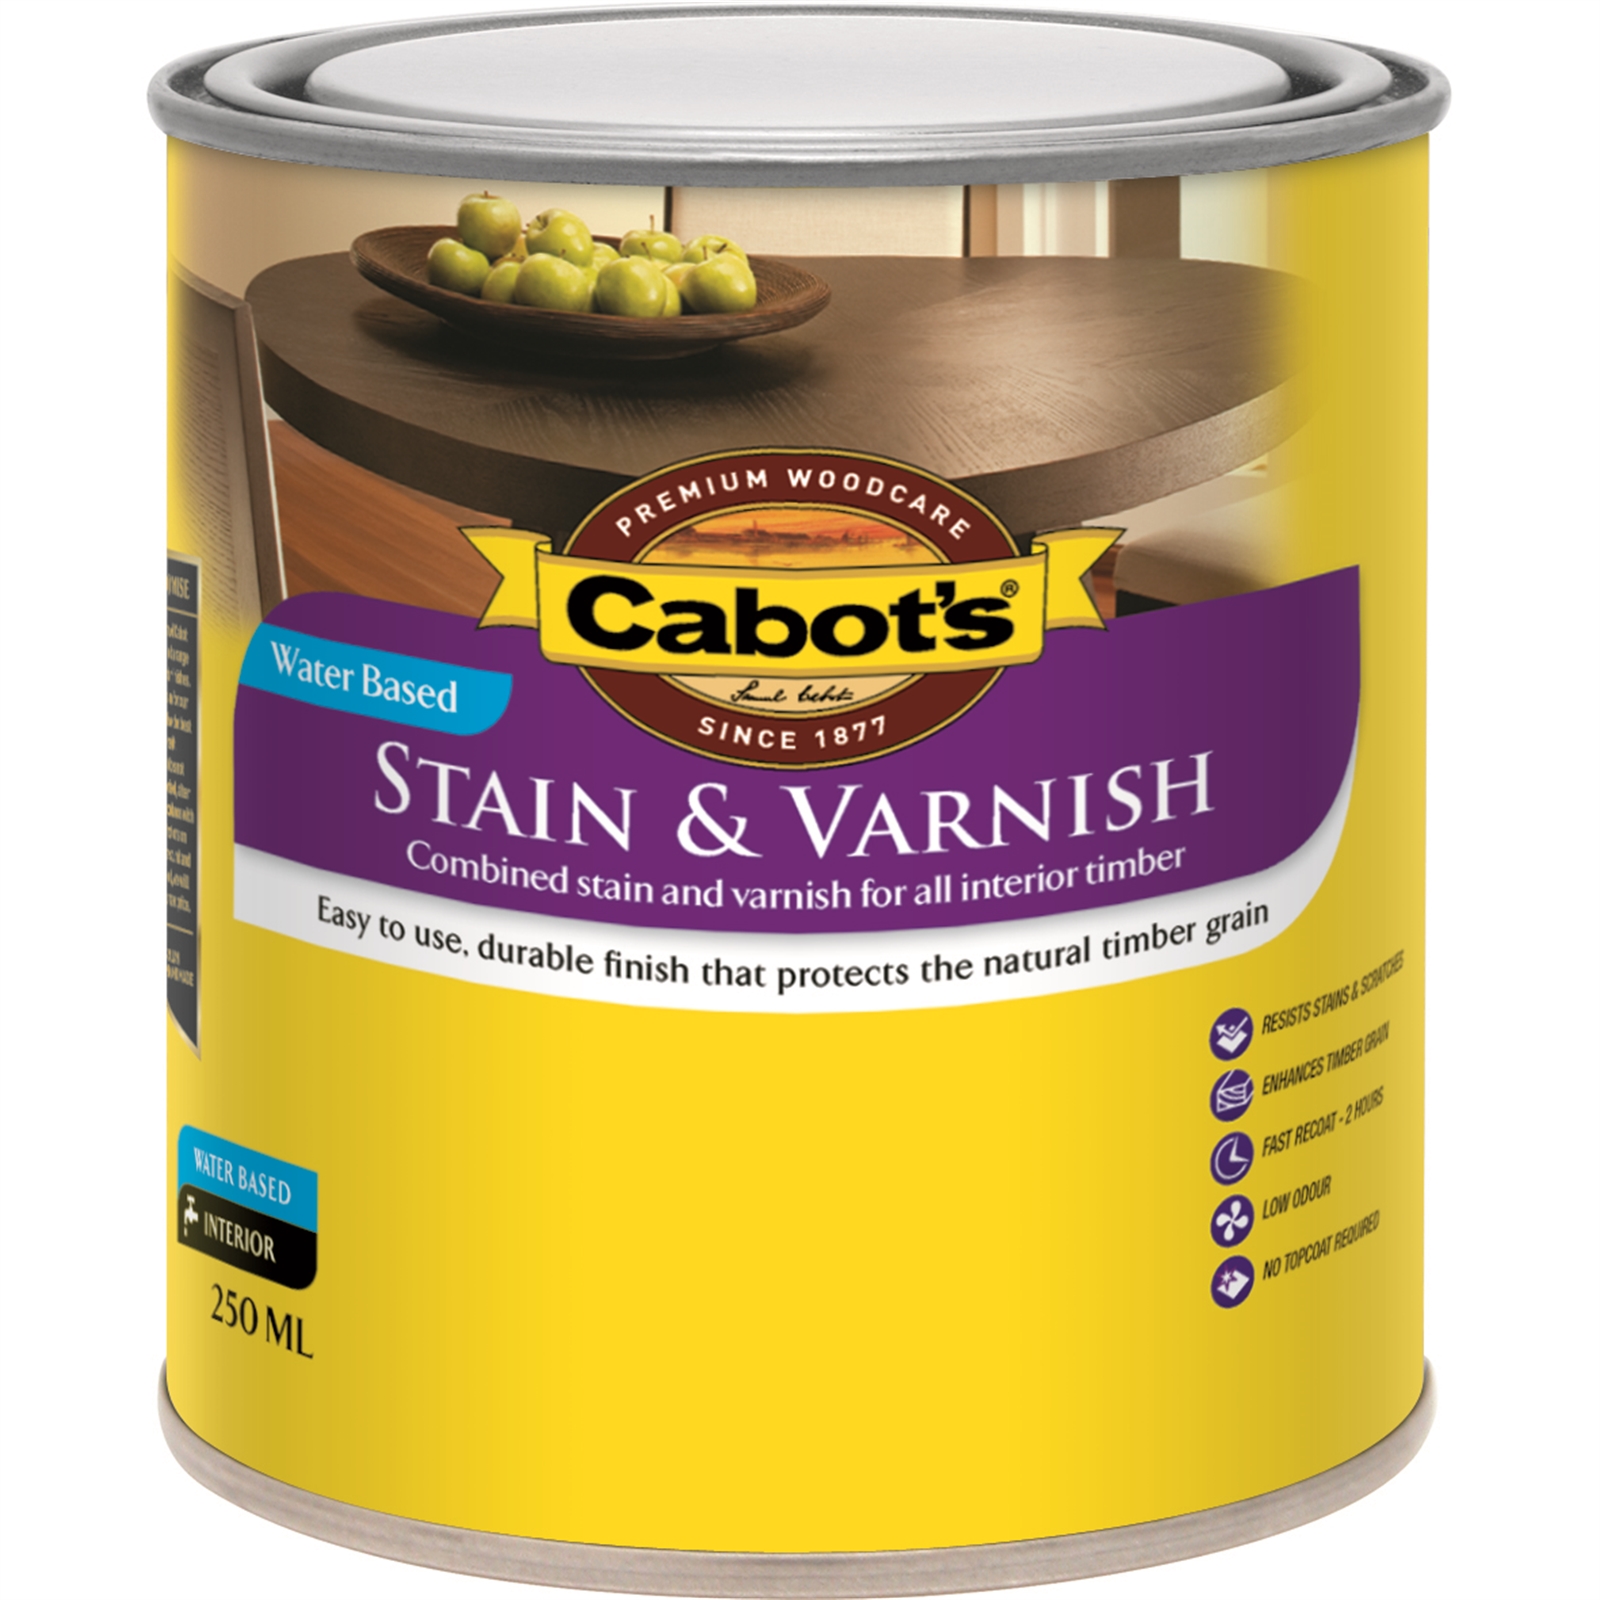 Cabot's 250ml Satin Jarrah Water Based Stain and Varnish